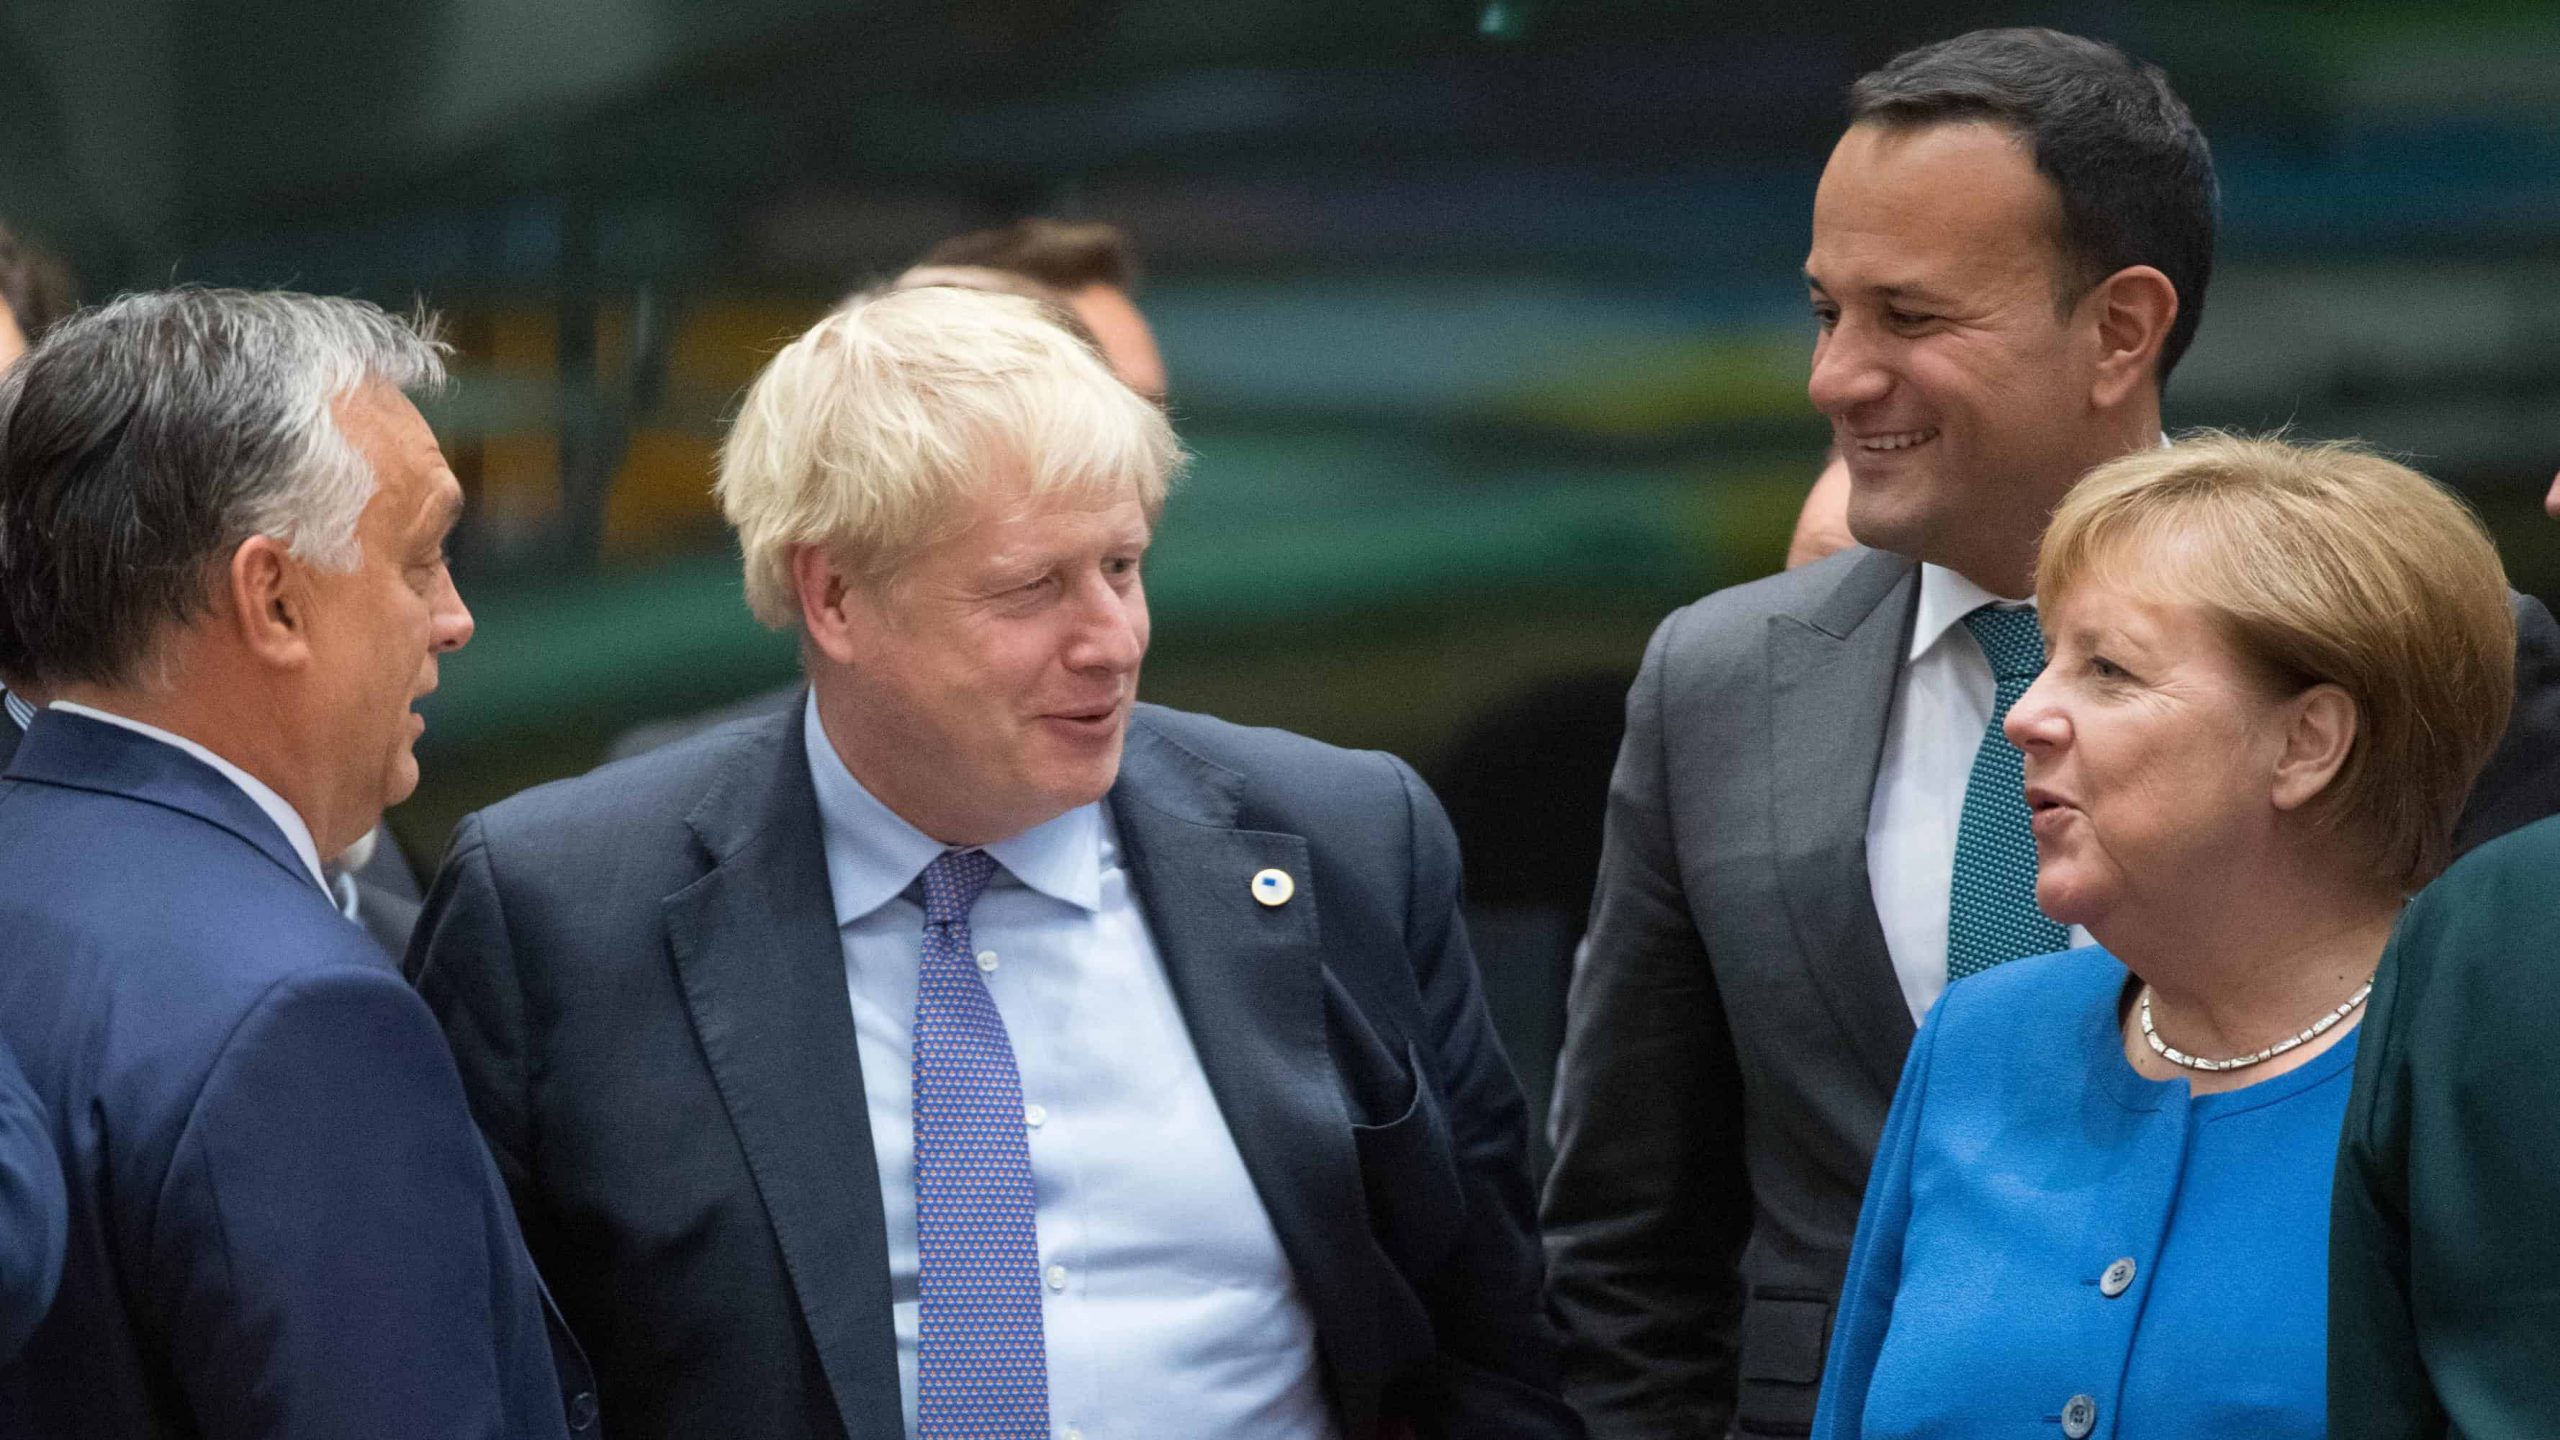 ‘With the Berlin wall, Germany was reunited within a year’ – Brexit could lead to united Ireland